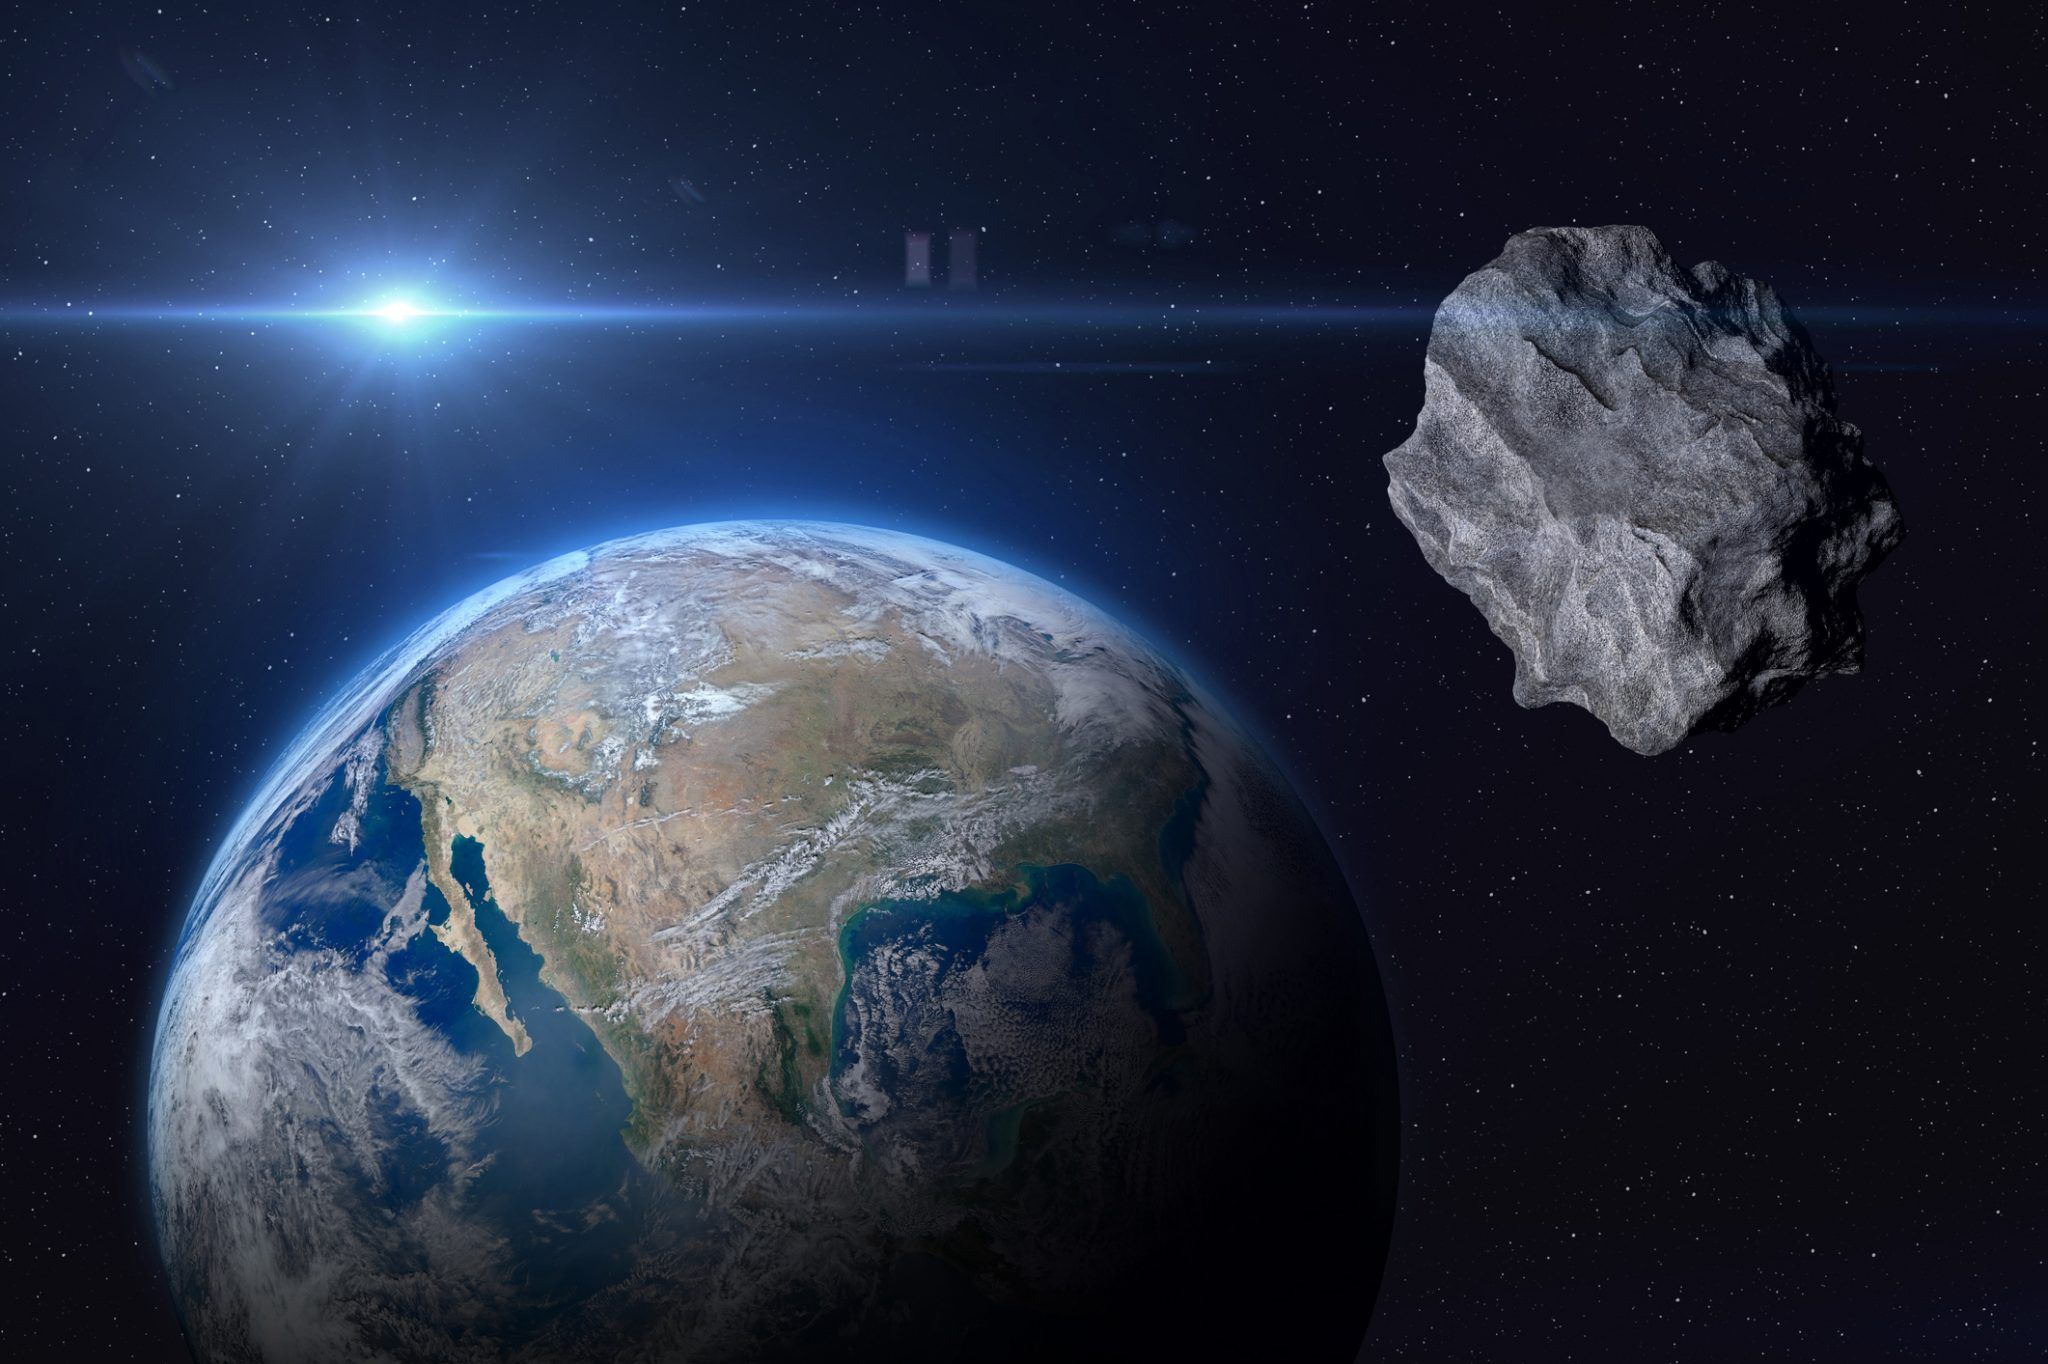 Planet Earth and big asteroid in the space. Concept a potentially hazardous object (PHO). Potentially hazardous asteroids (PHAs). Asteroid in outer space near Earth planet. Stony-iron meteorite is solar system. Elements of this image furnished by NASA. ______ Url(s): "https://www.nasa.gov/multimedia/imagegallery/image_feature_2159.html" Software: Adobe Photoshop CC 2015. Knoll light factory. Adobe After Effects CC 2017. 3ds Max 2016.